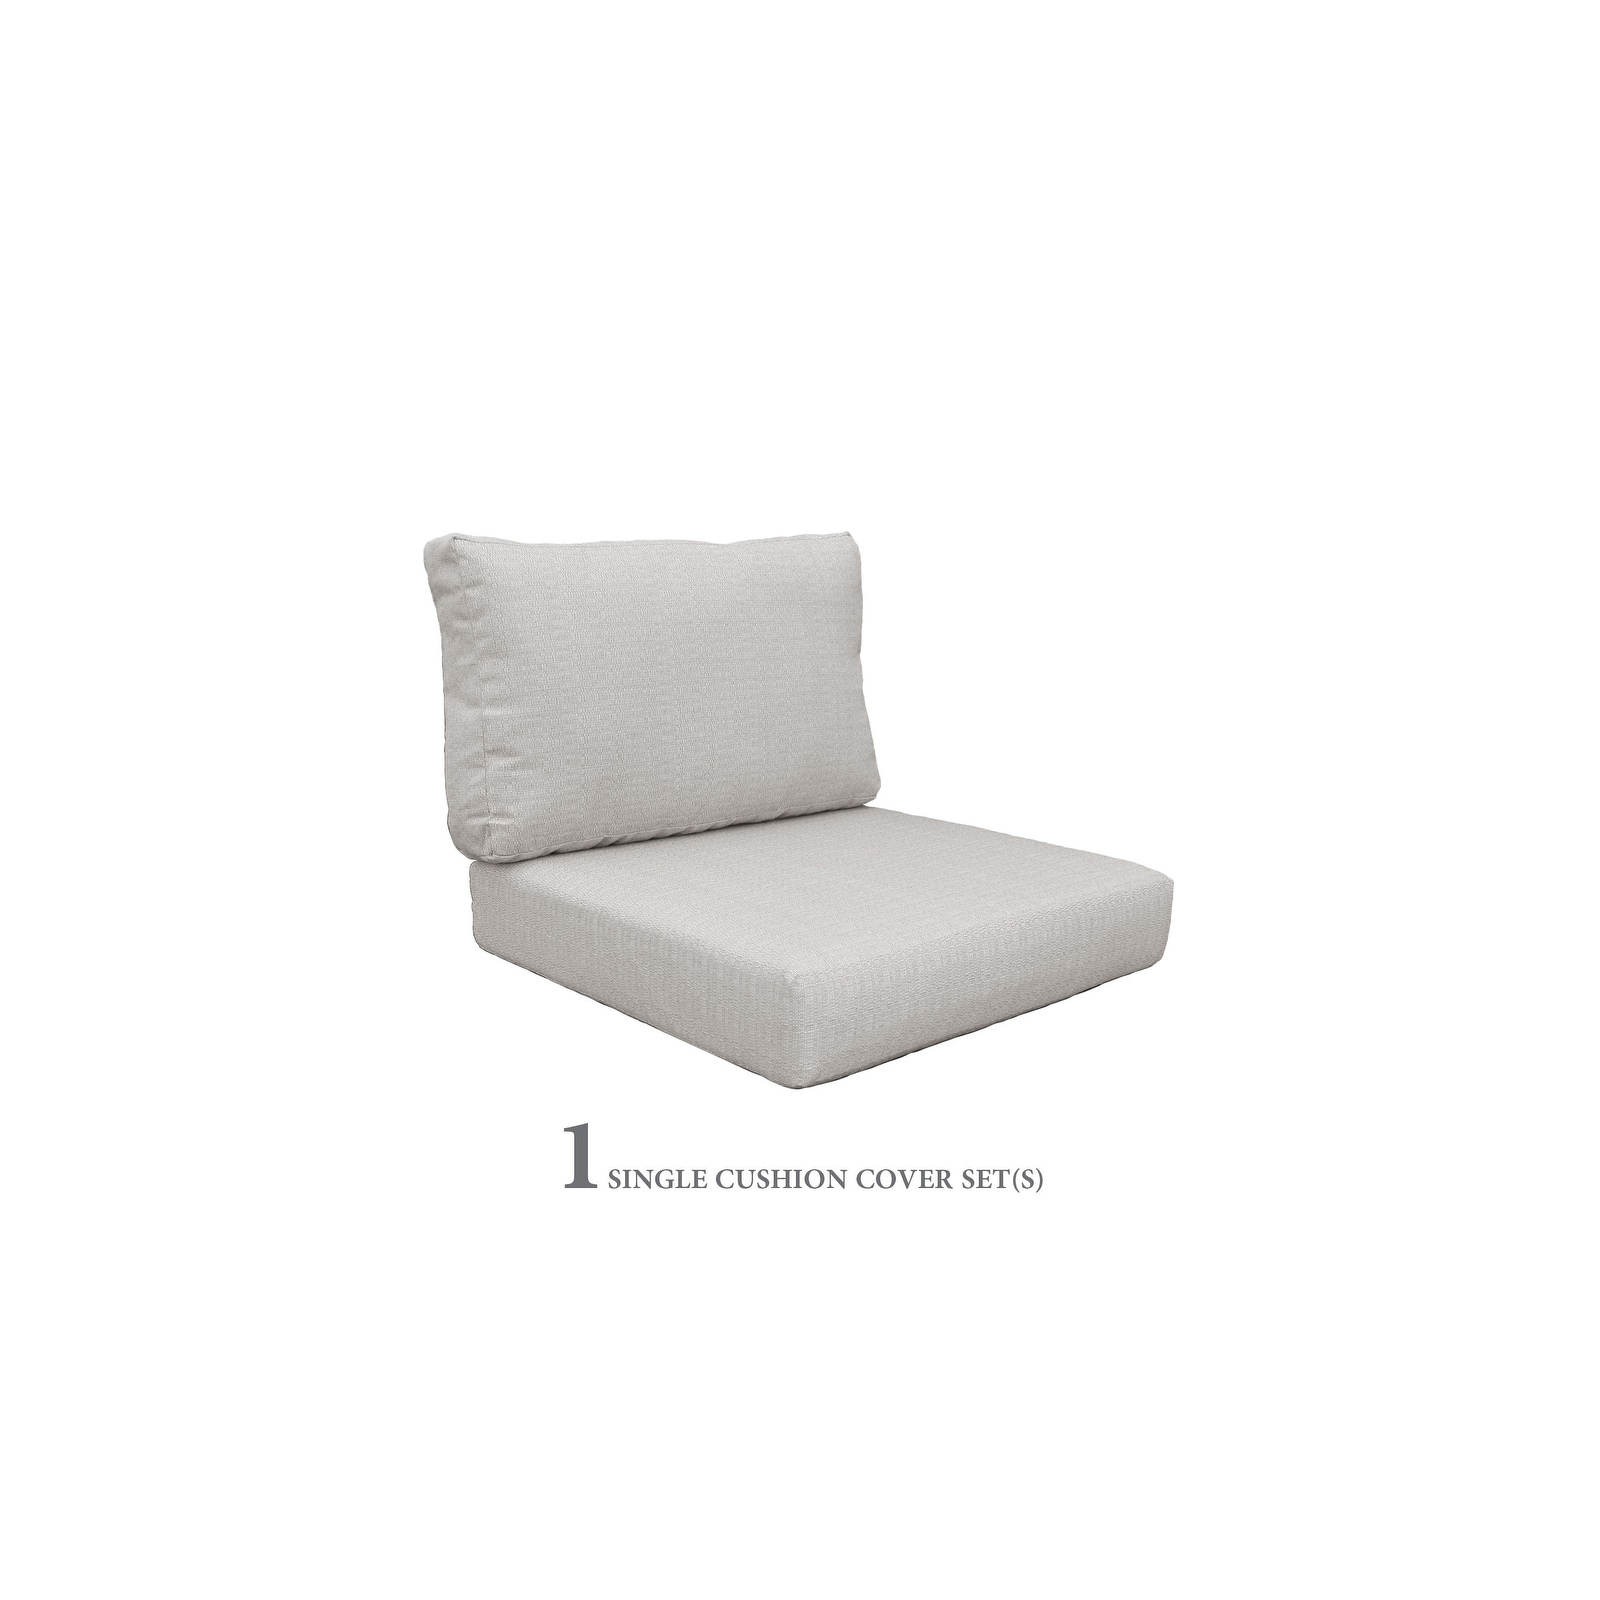 6 inch High Back Cushions for Chairs